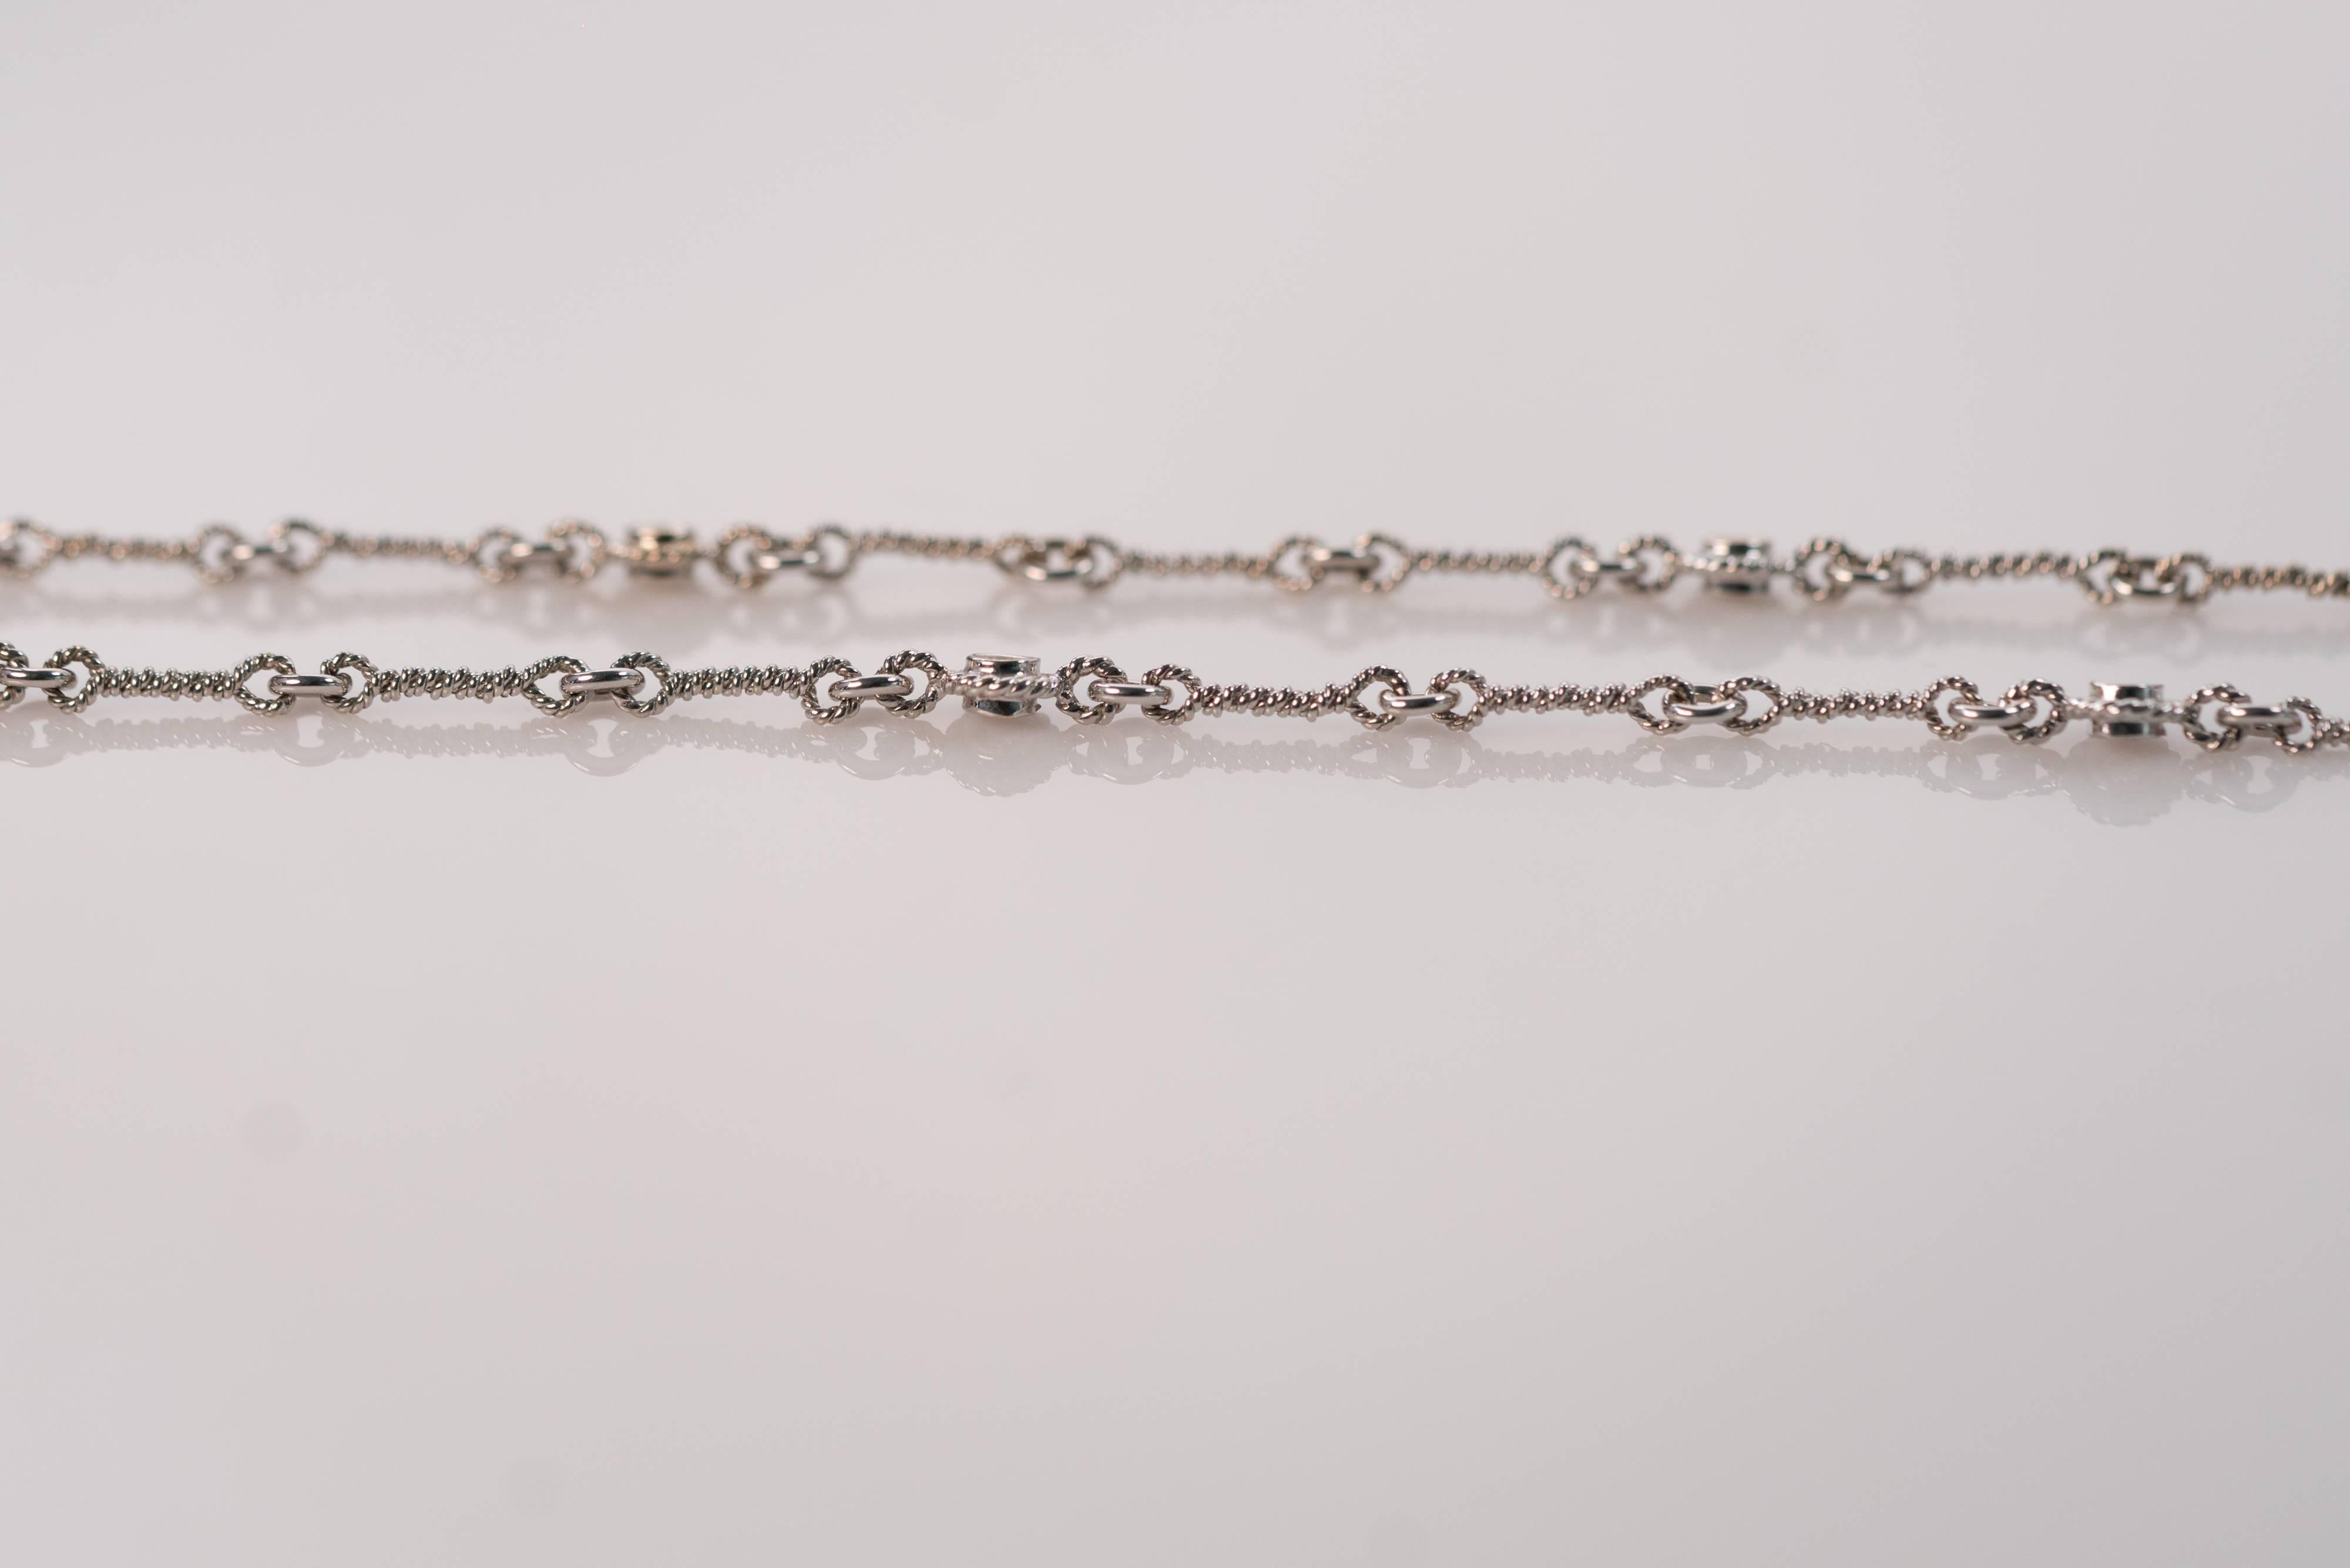 The wire-turned links of this 1990s 18 karat white gold and diamond necklace give classic simplicity a modern decorative twist. 
Made in Italy, this necklace features a lobster claw clasp and eight bezel set diamonds evenly spaced with wire-turned